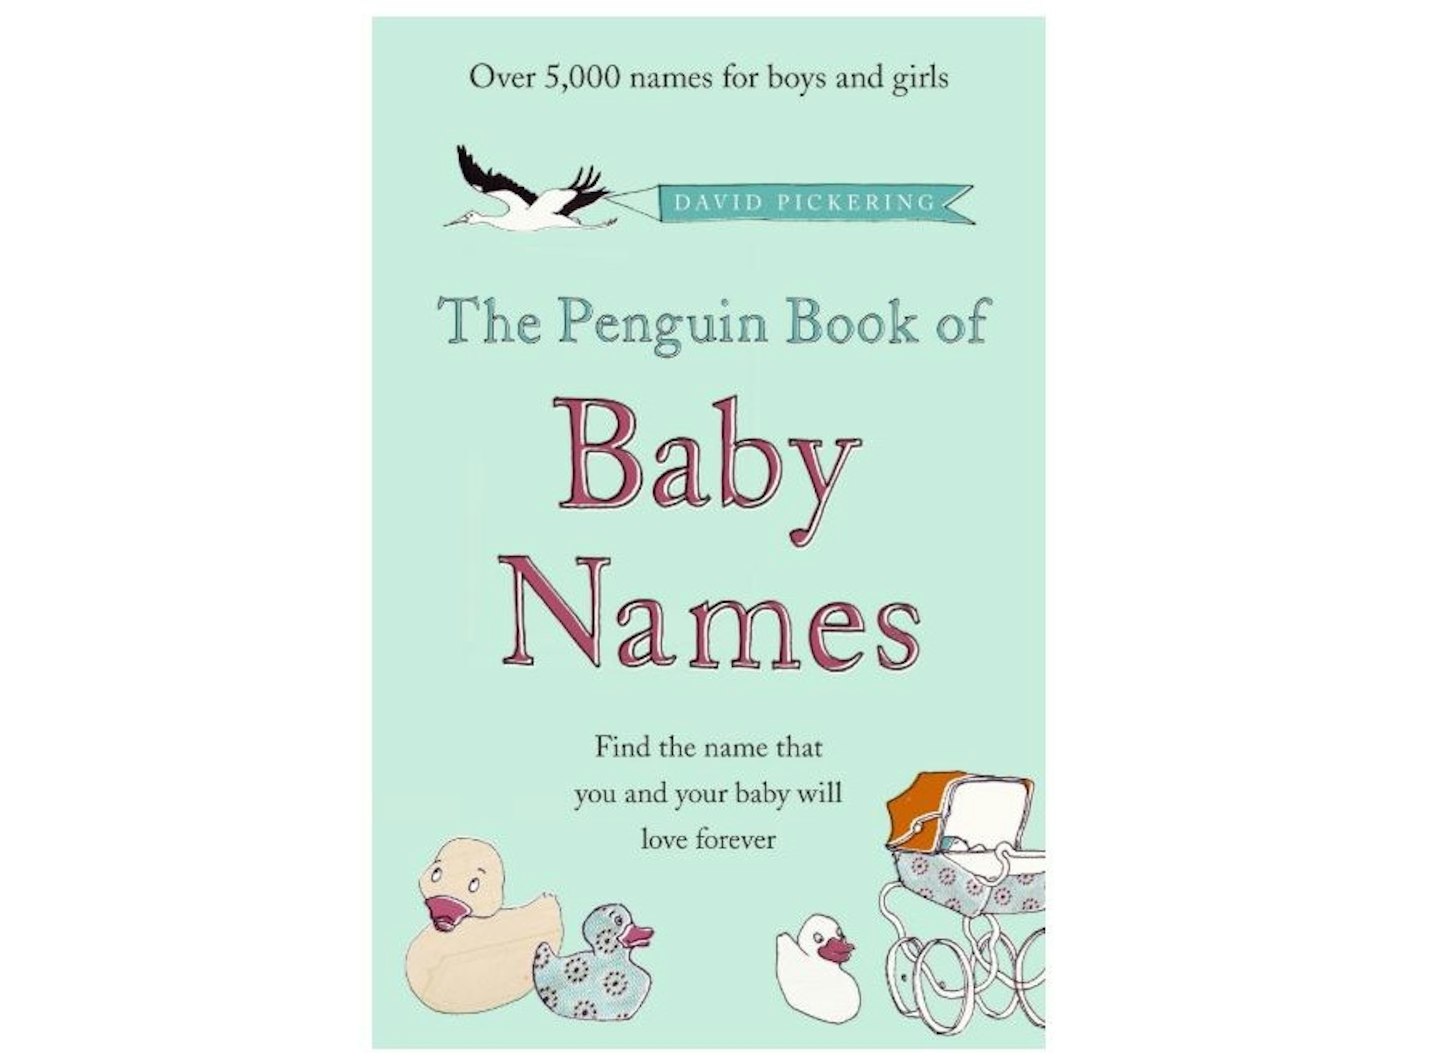 The Penguin Book of Baby Names, 4.87